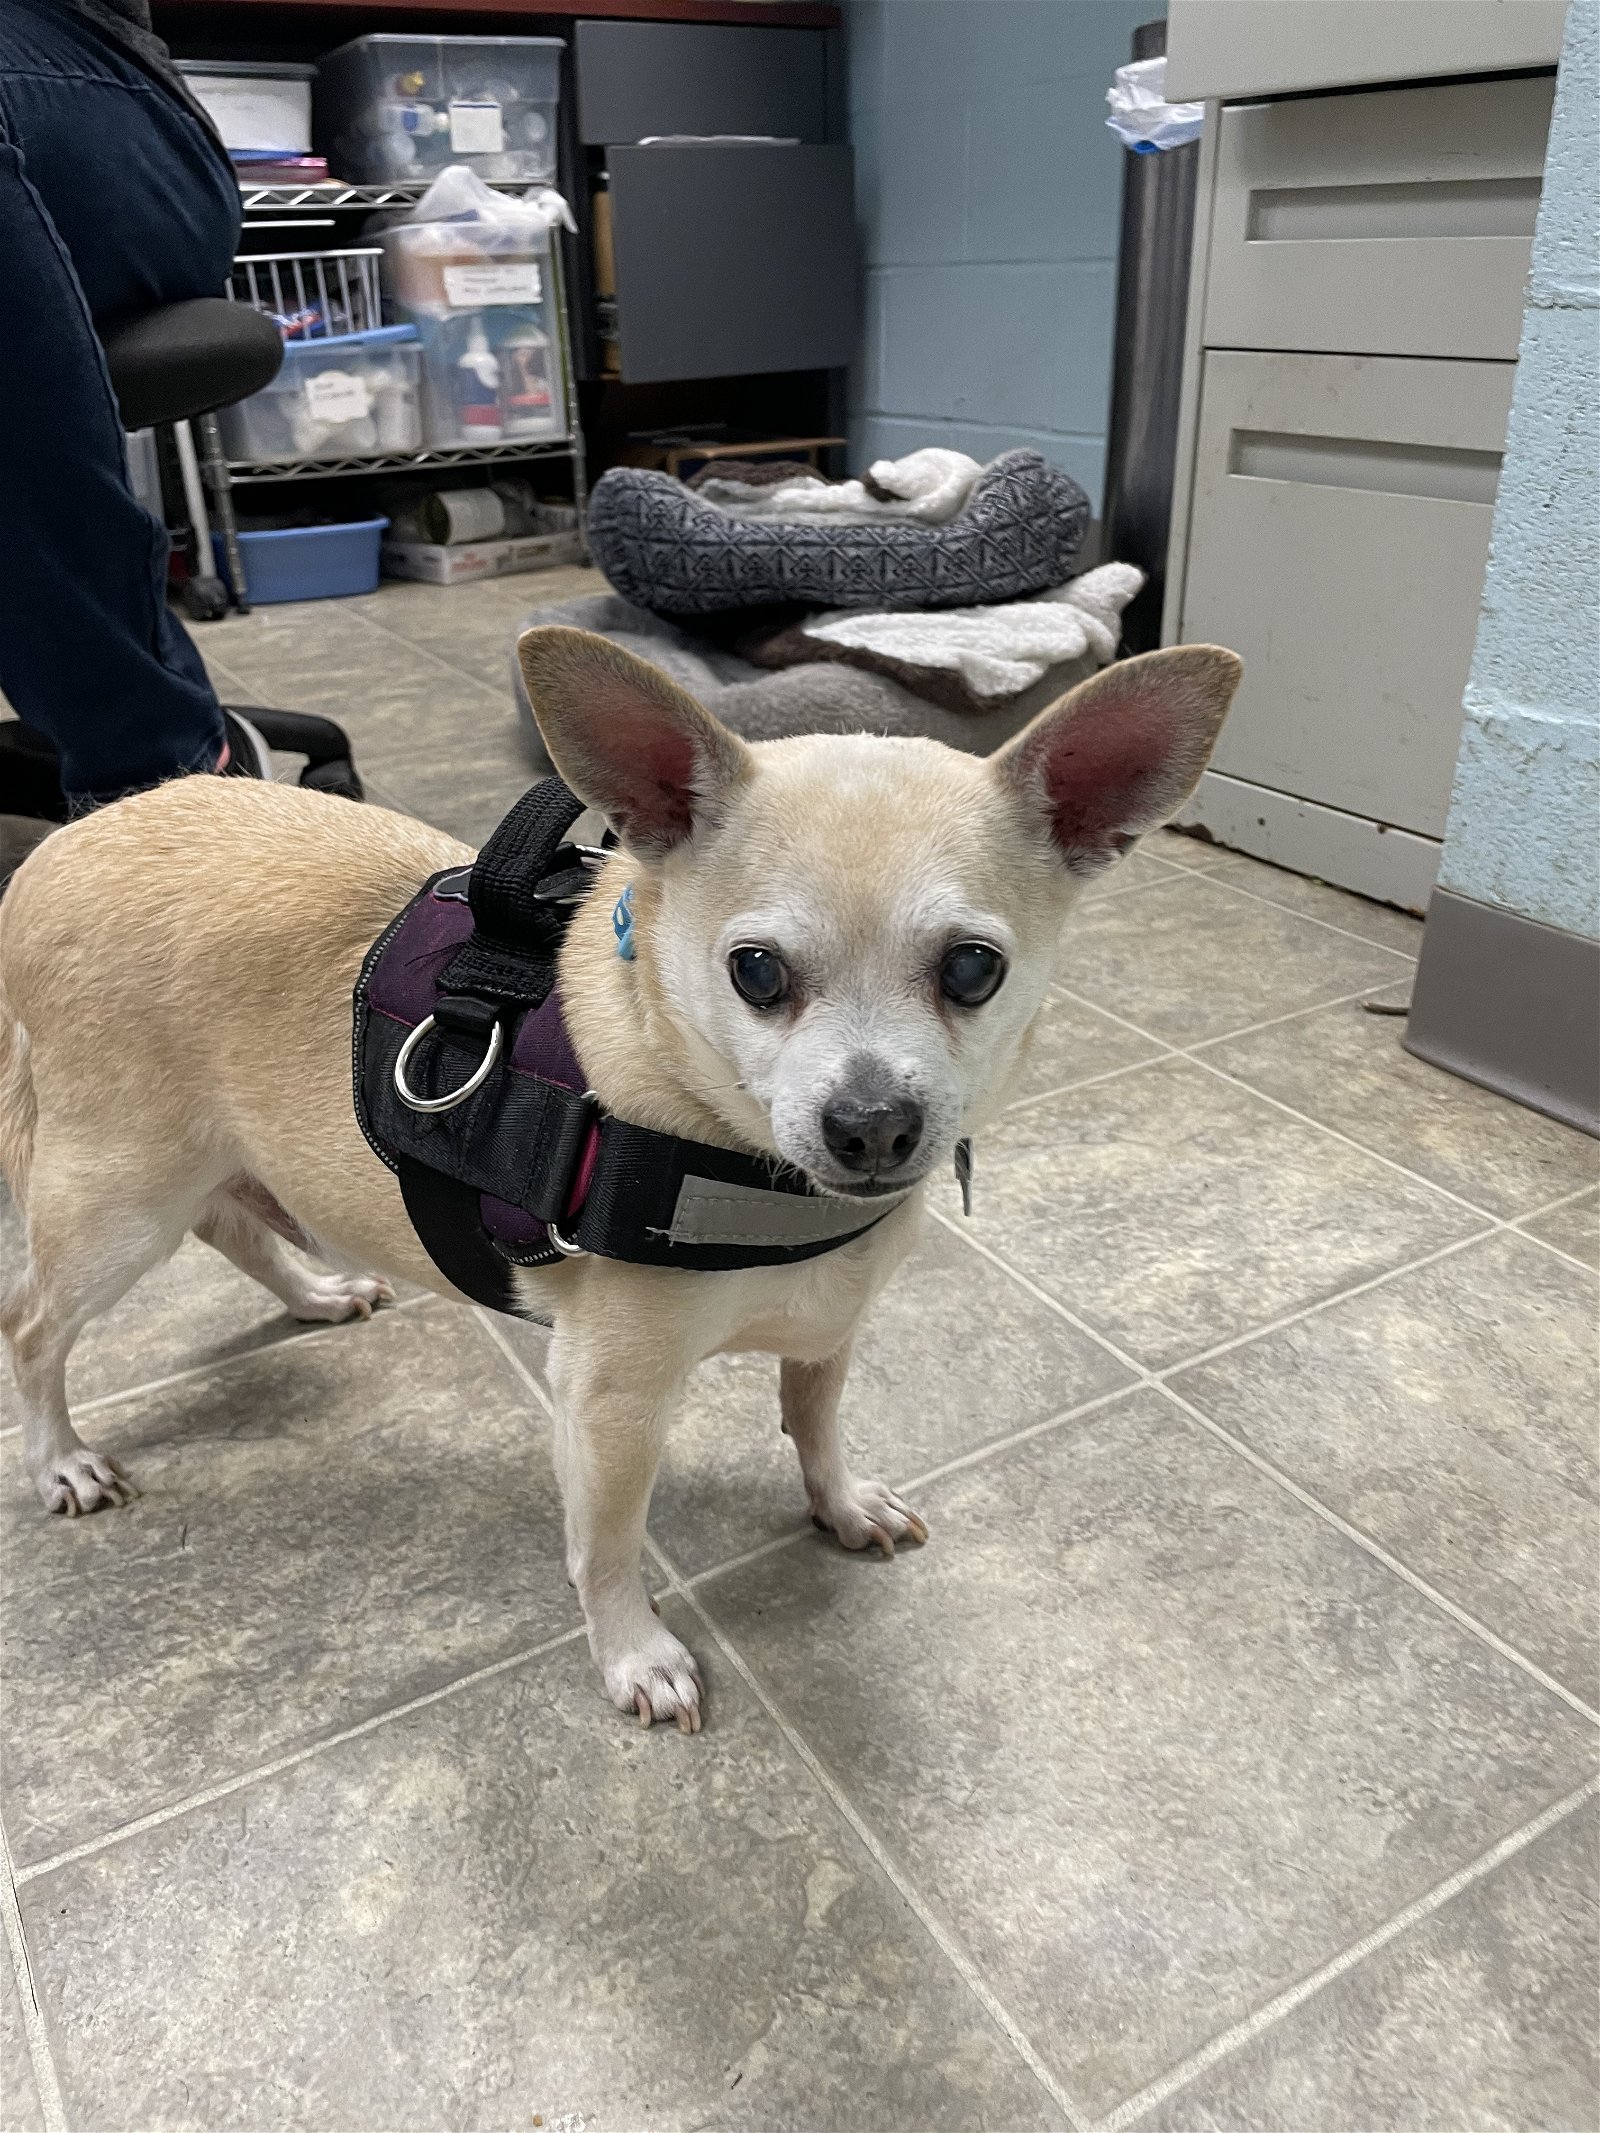 Tiny*: Not at the shelter